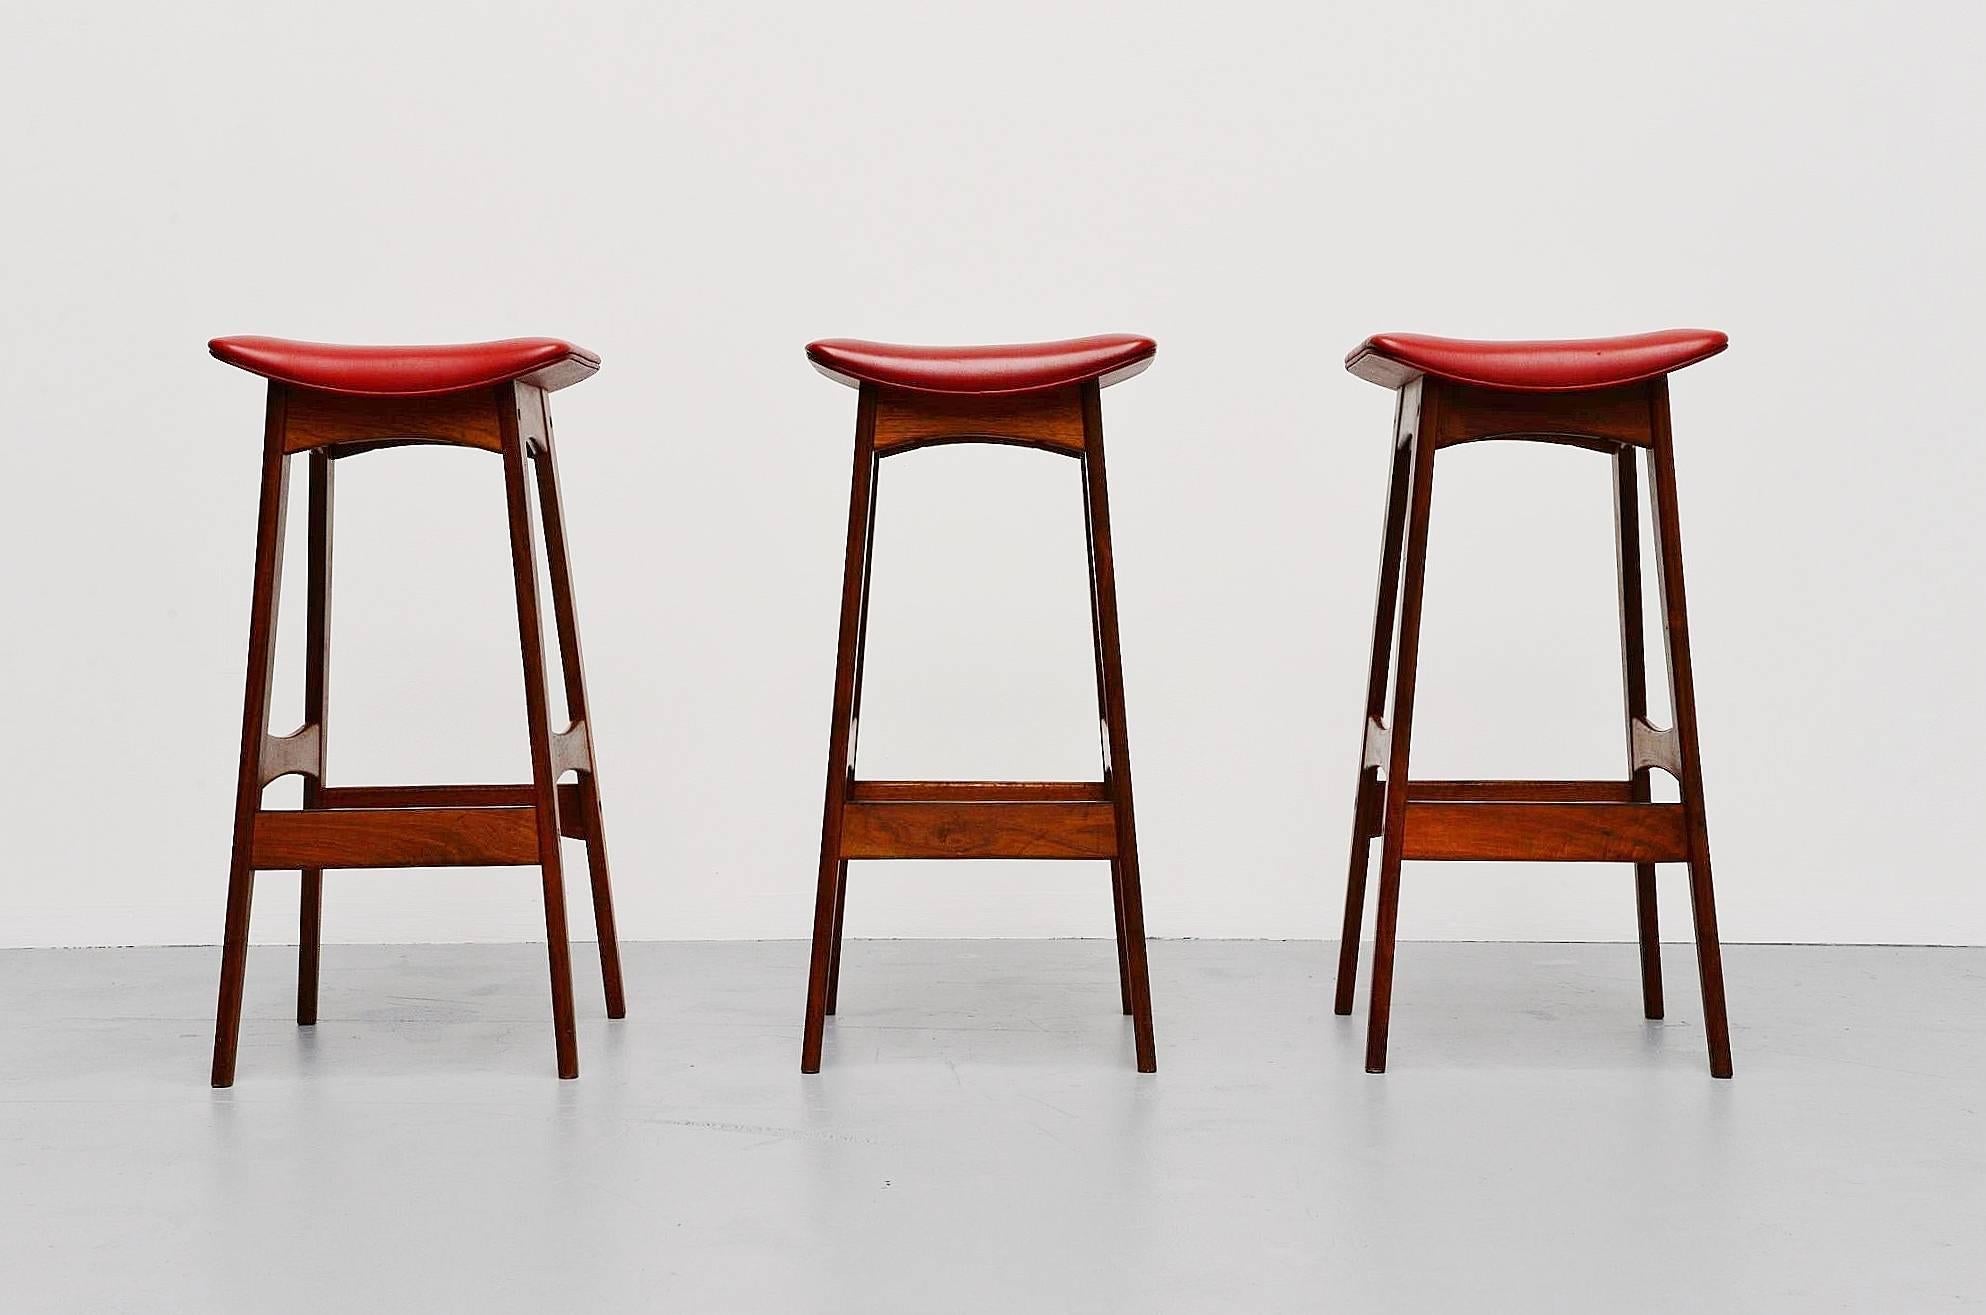 Fantastic set of three counter bar stools designed by Johannes Andersen manufactured by Brdr. Andersens Møbelfabrik A/S, Denmark, 1961. These stools have a solid teak base with black metal protected feet rest. The stools are originally upholstered